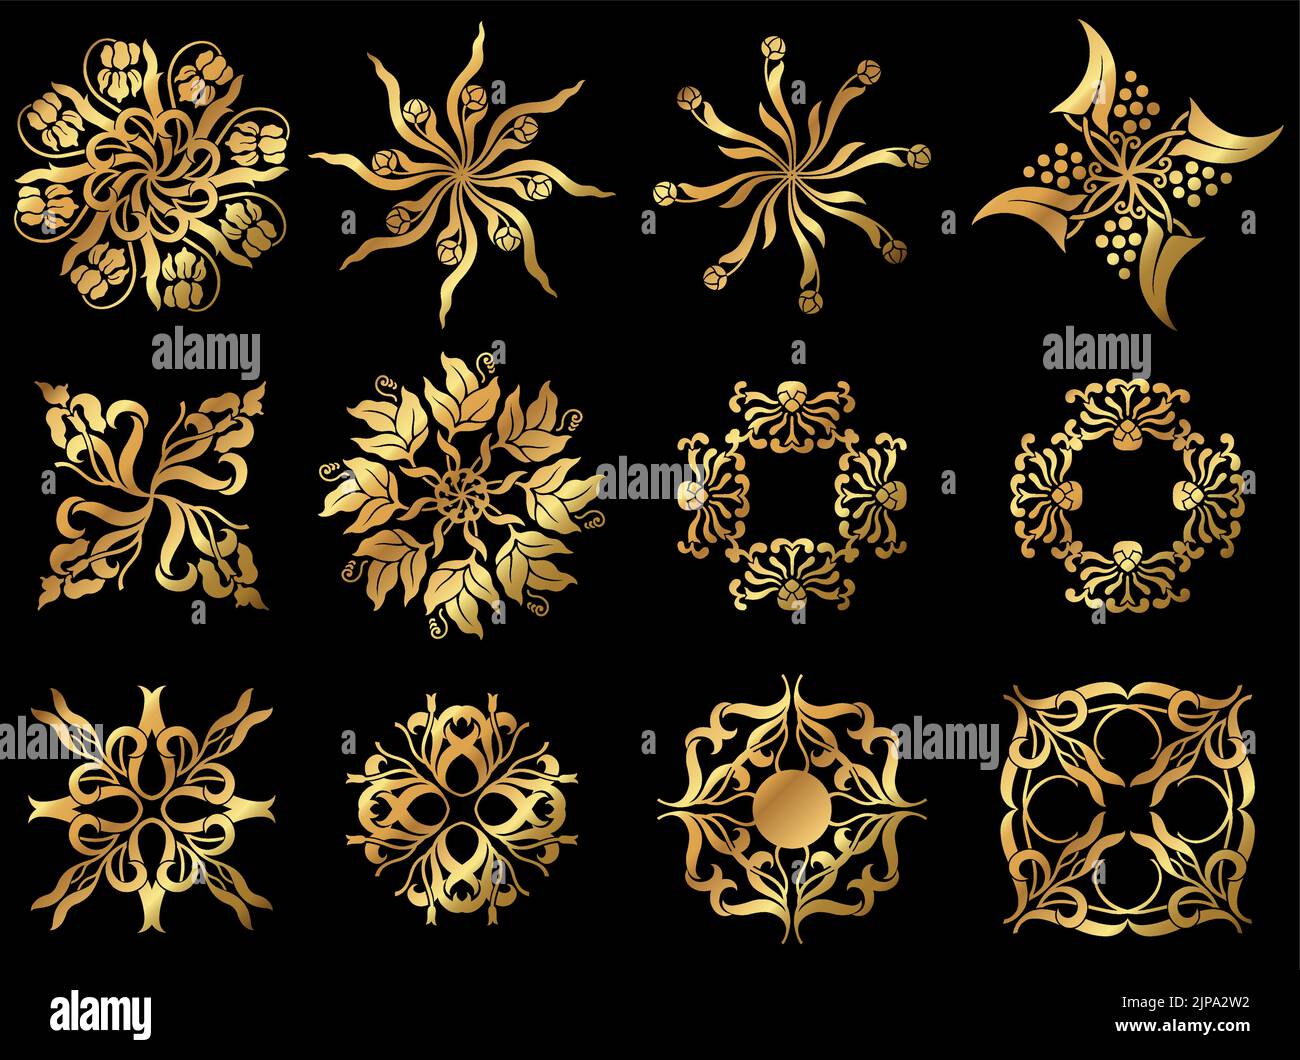 A set of vintage vector gold floral decorative icons. Stock Vector